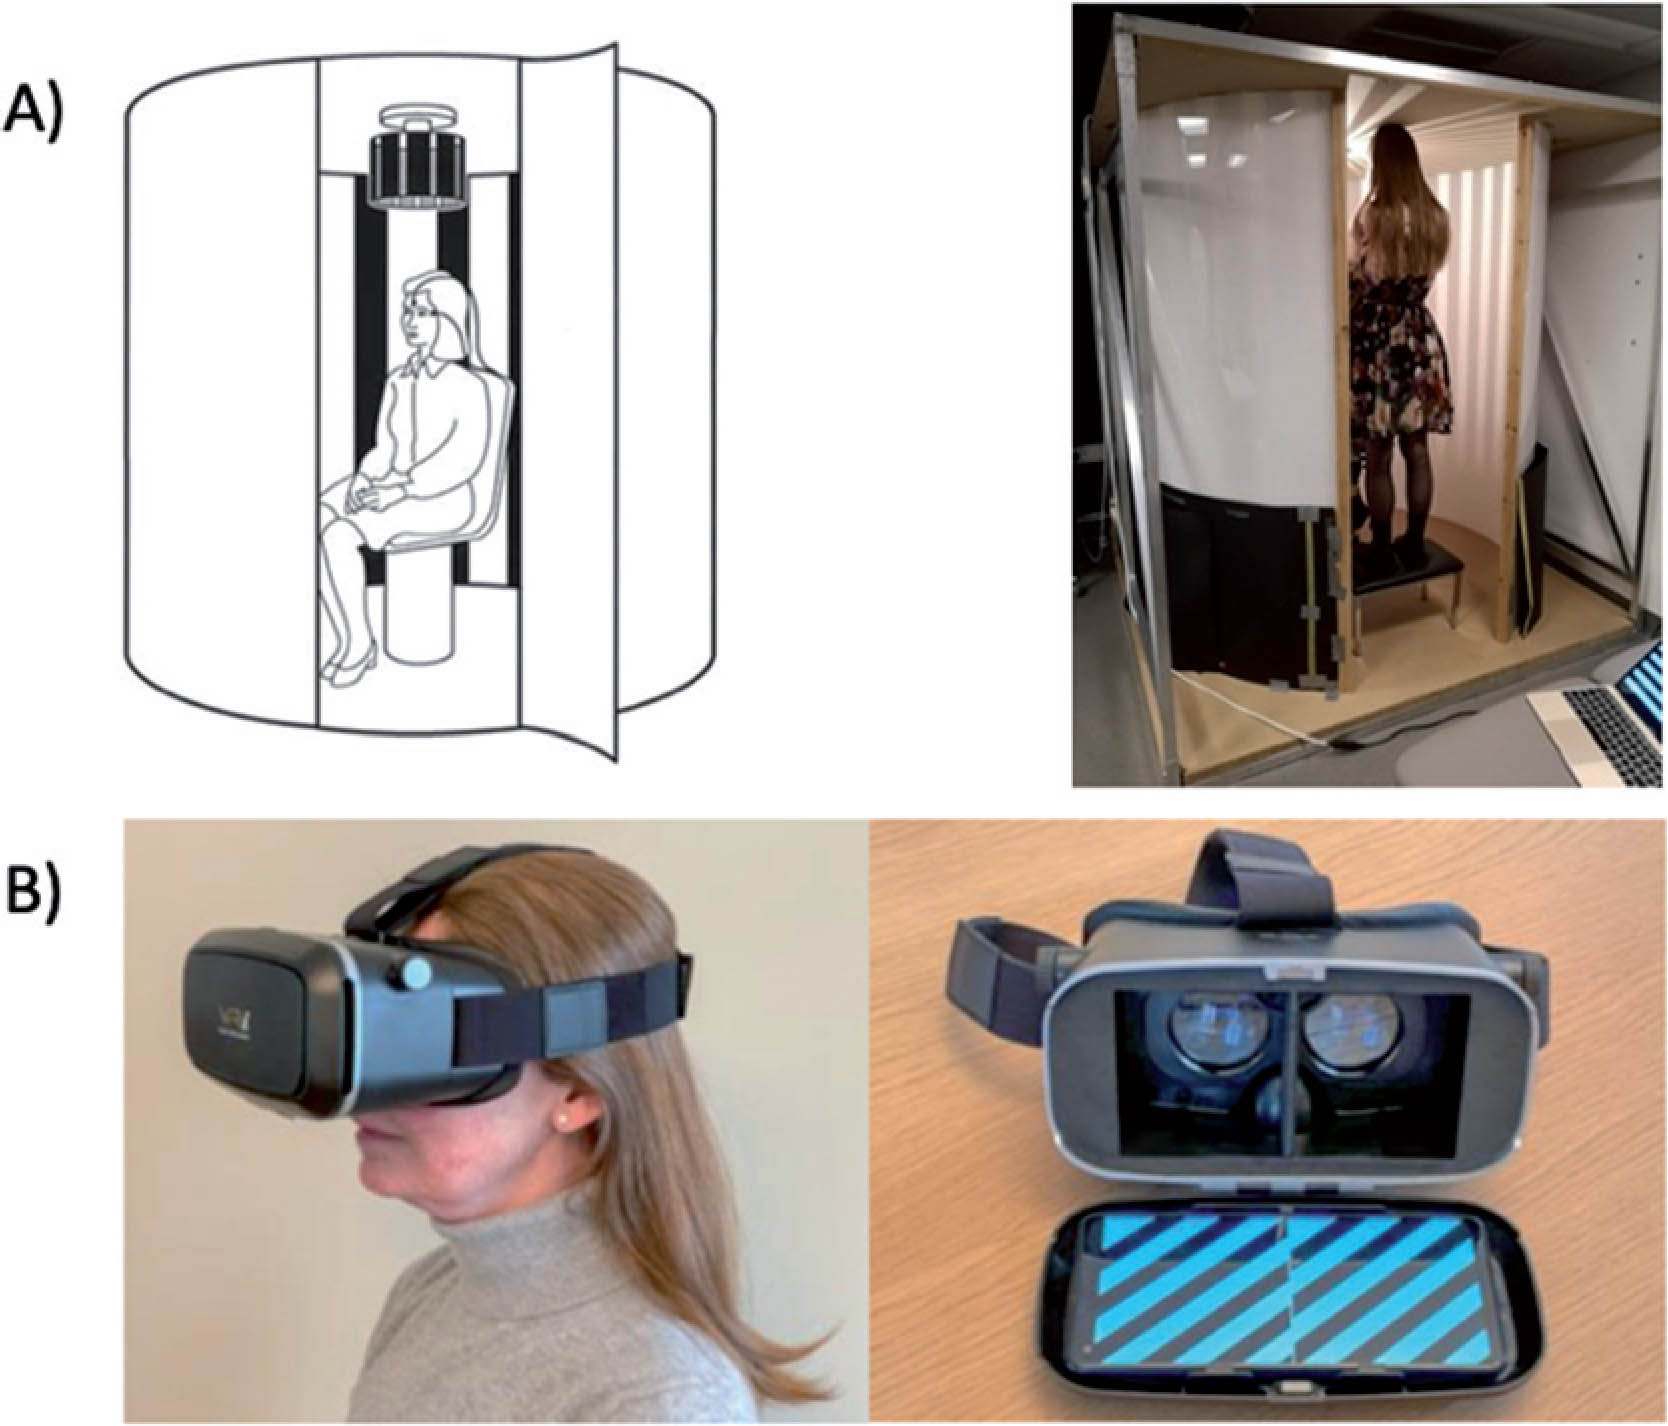 A) OKN booth and B) MdDS Reset virtual reality application, used for the OKN treatment in MdDS patients